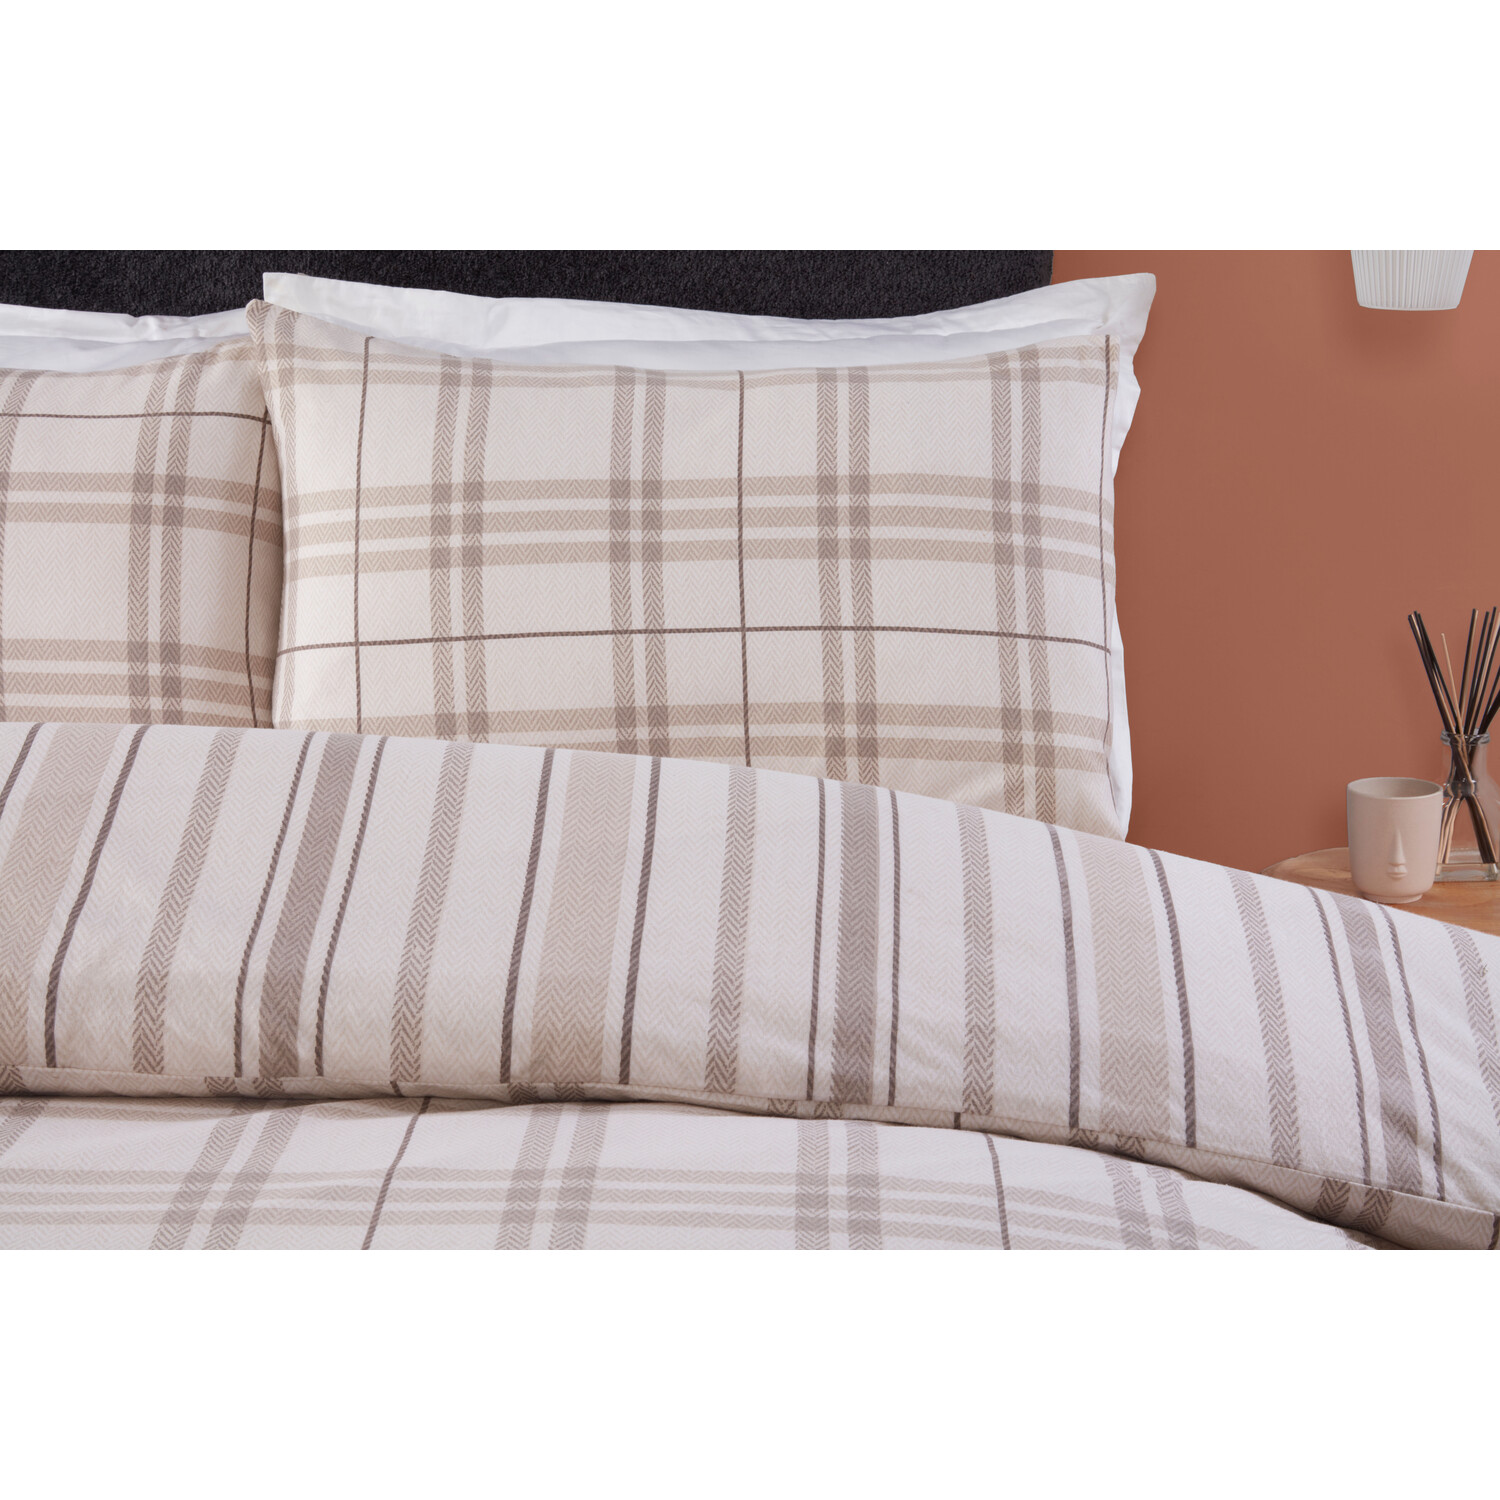 Fall Autumn Single Brown Check Duvet Cover and Pillowcase Set Image 4